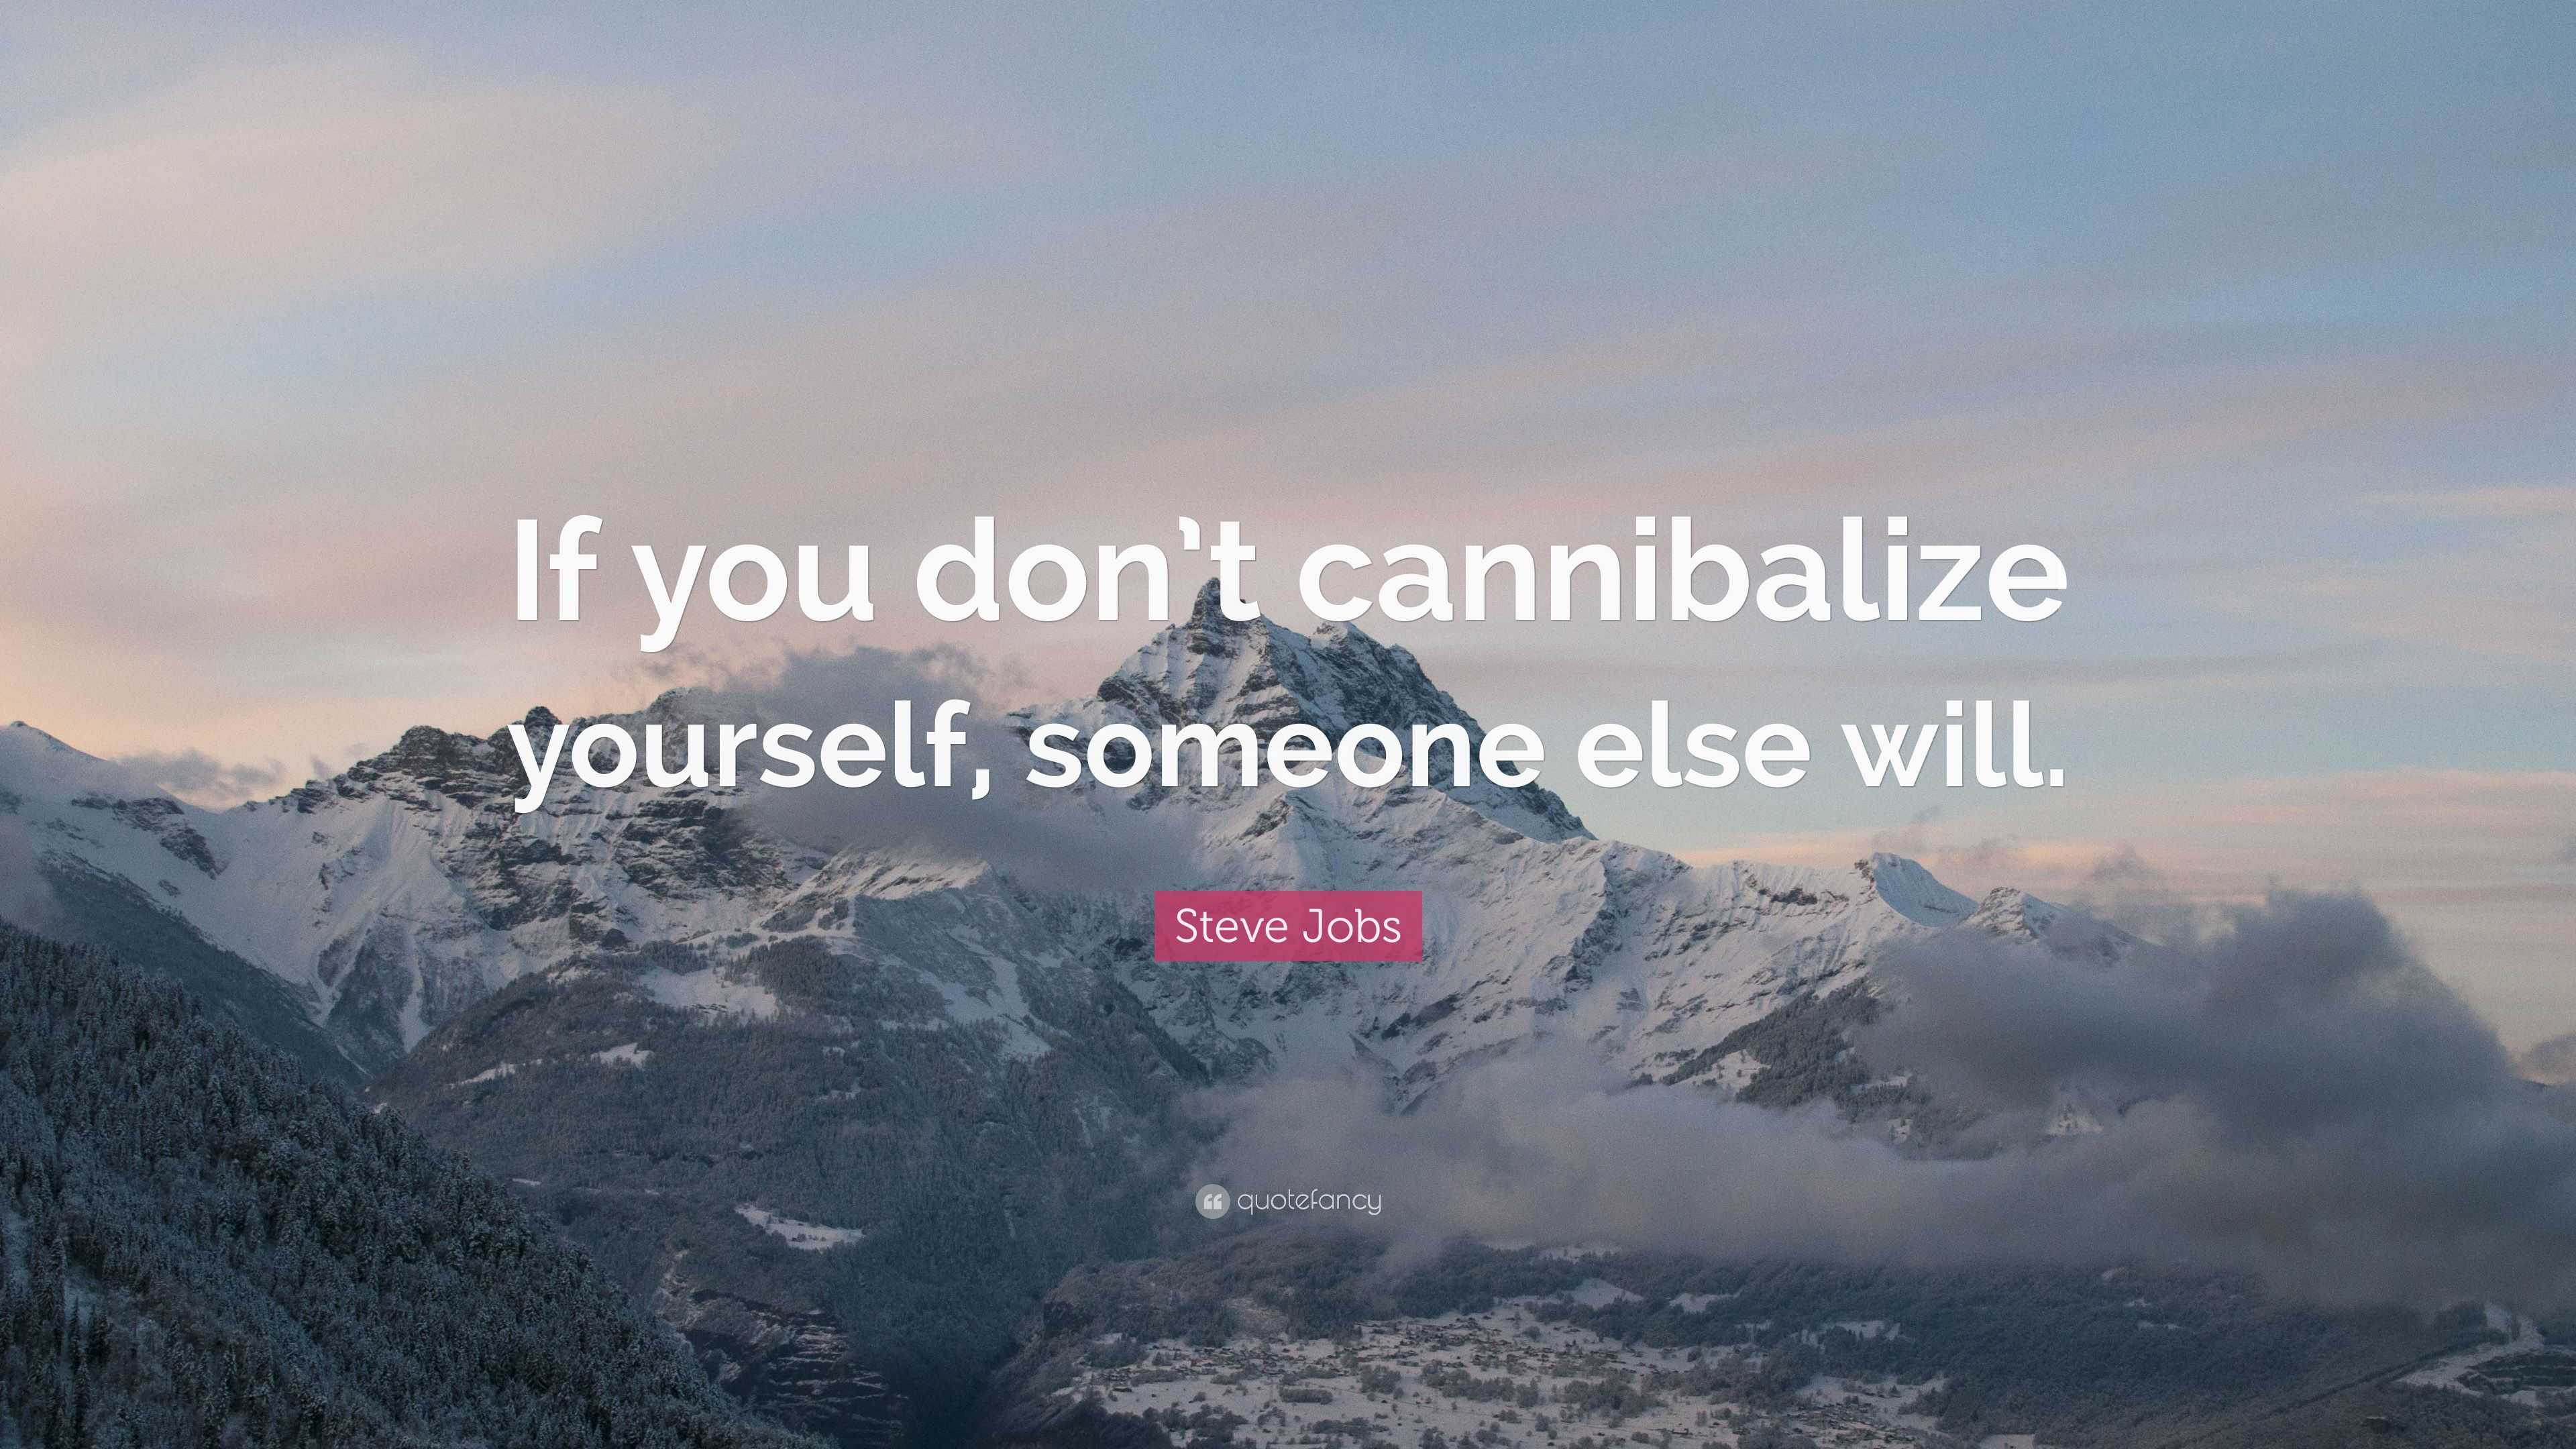 If you don't cannibalize yourself, someone else will - Future Startup